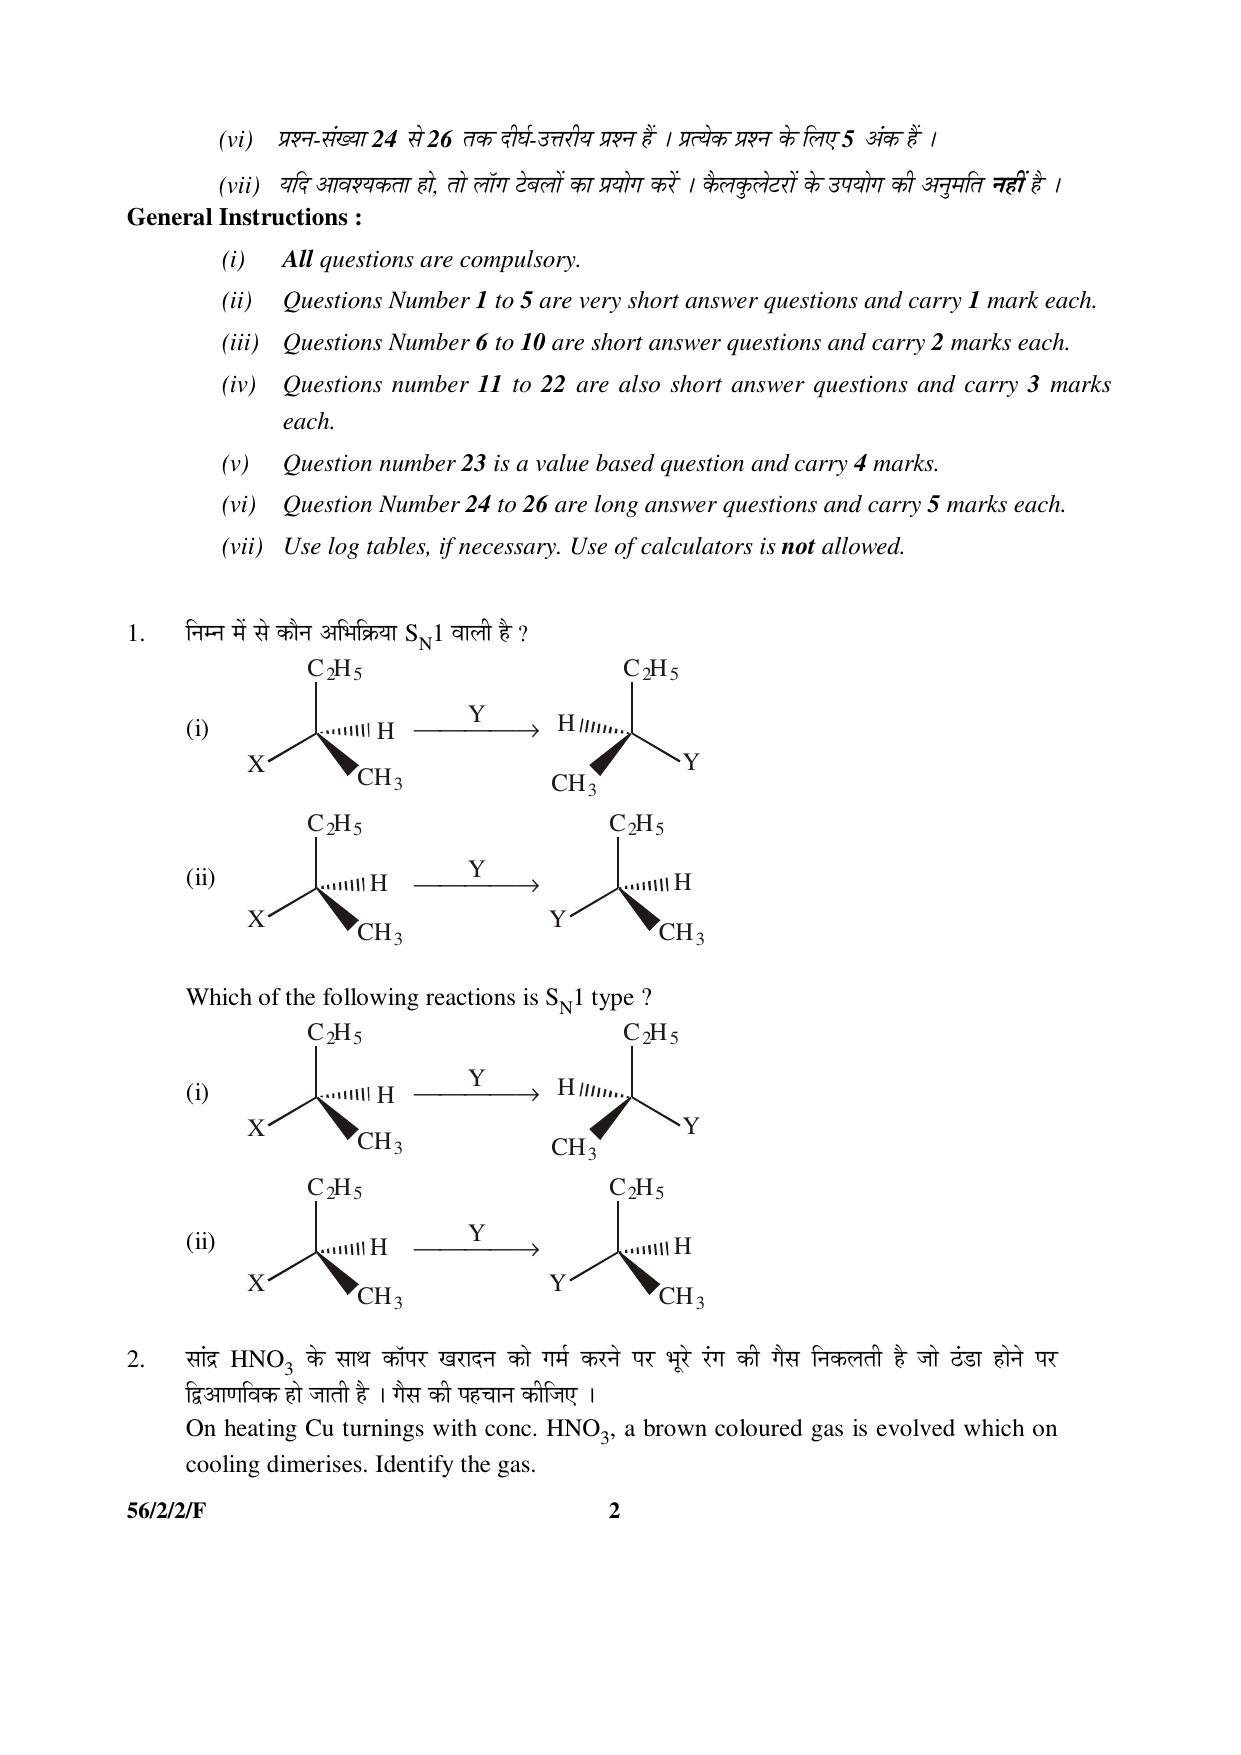 CBSE Class 12 56-2-2-F _Chemistry_ 2016 Question Paper - Page 2